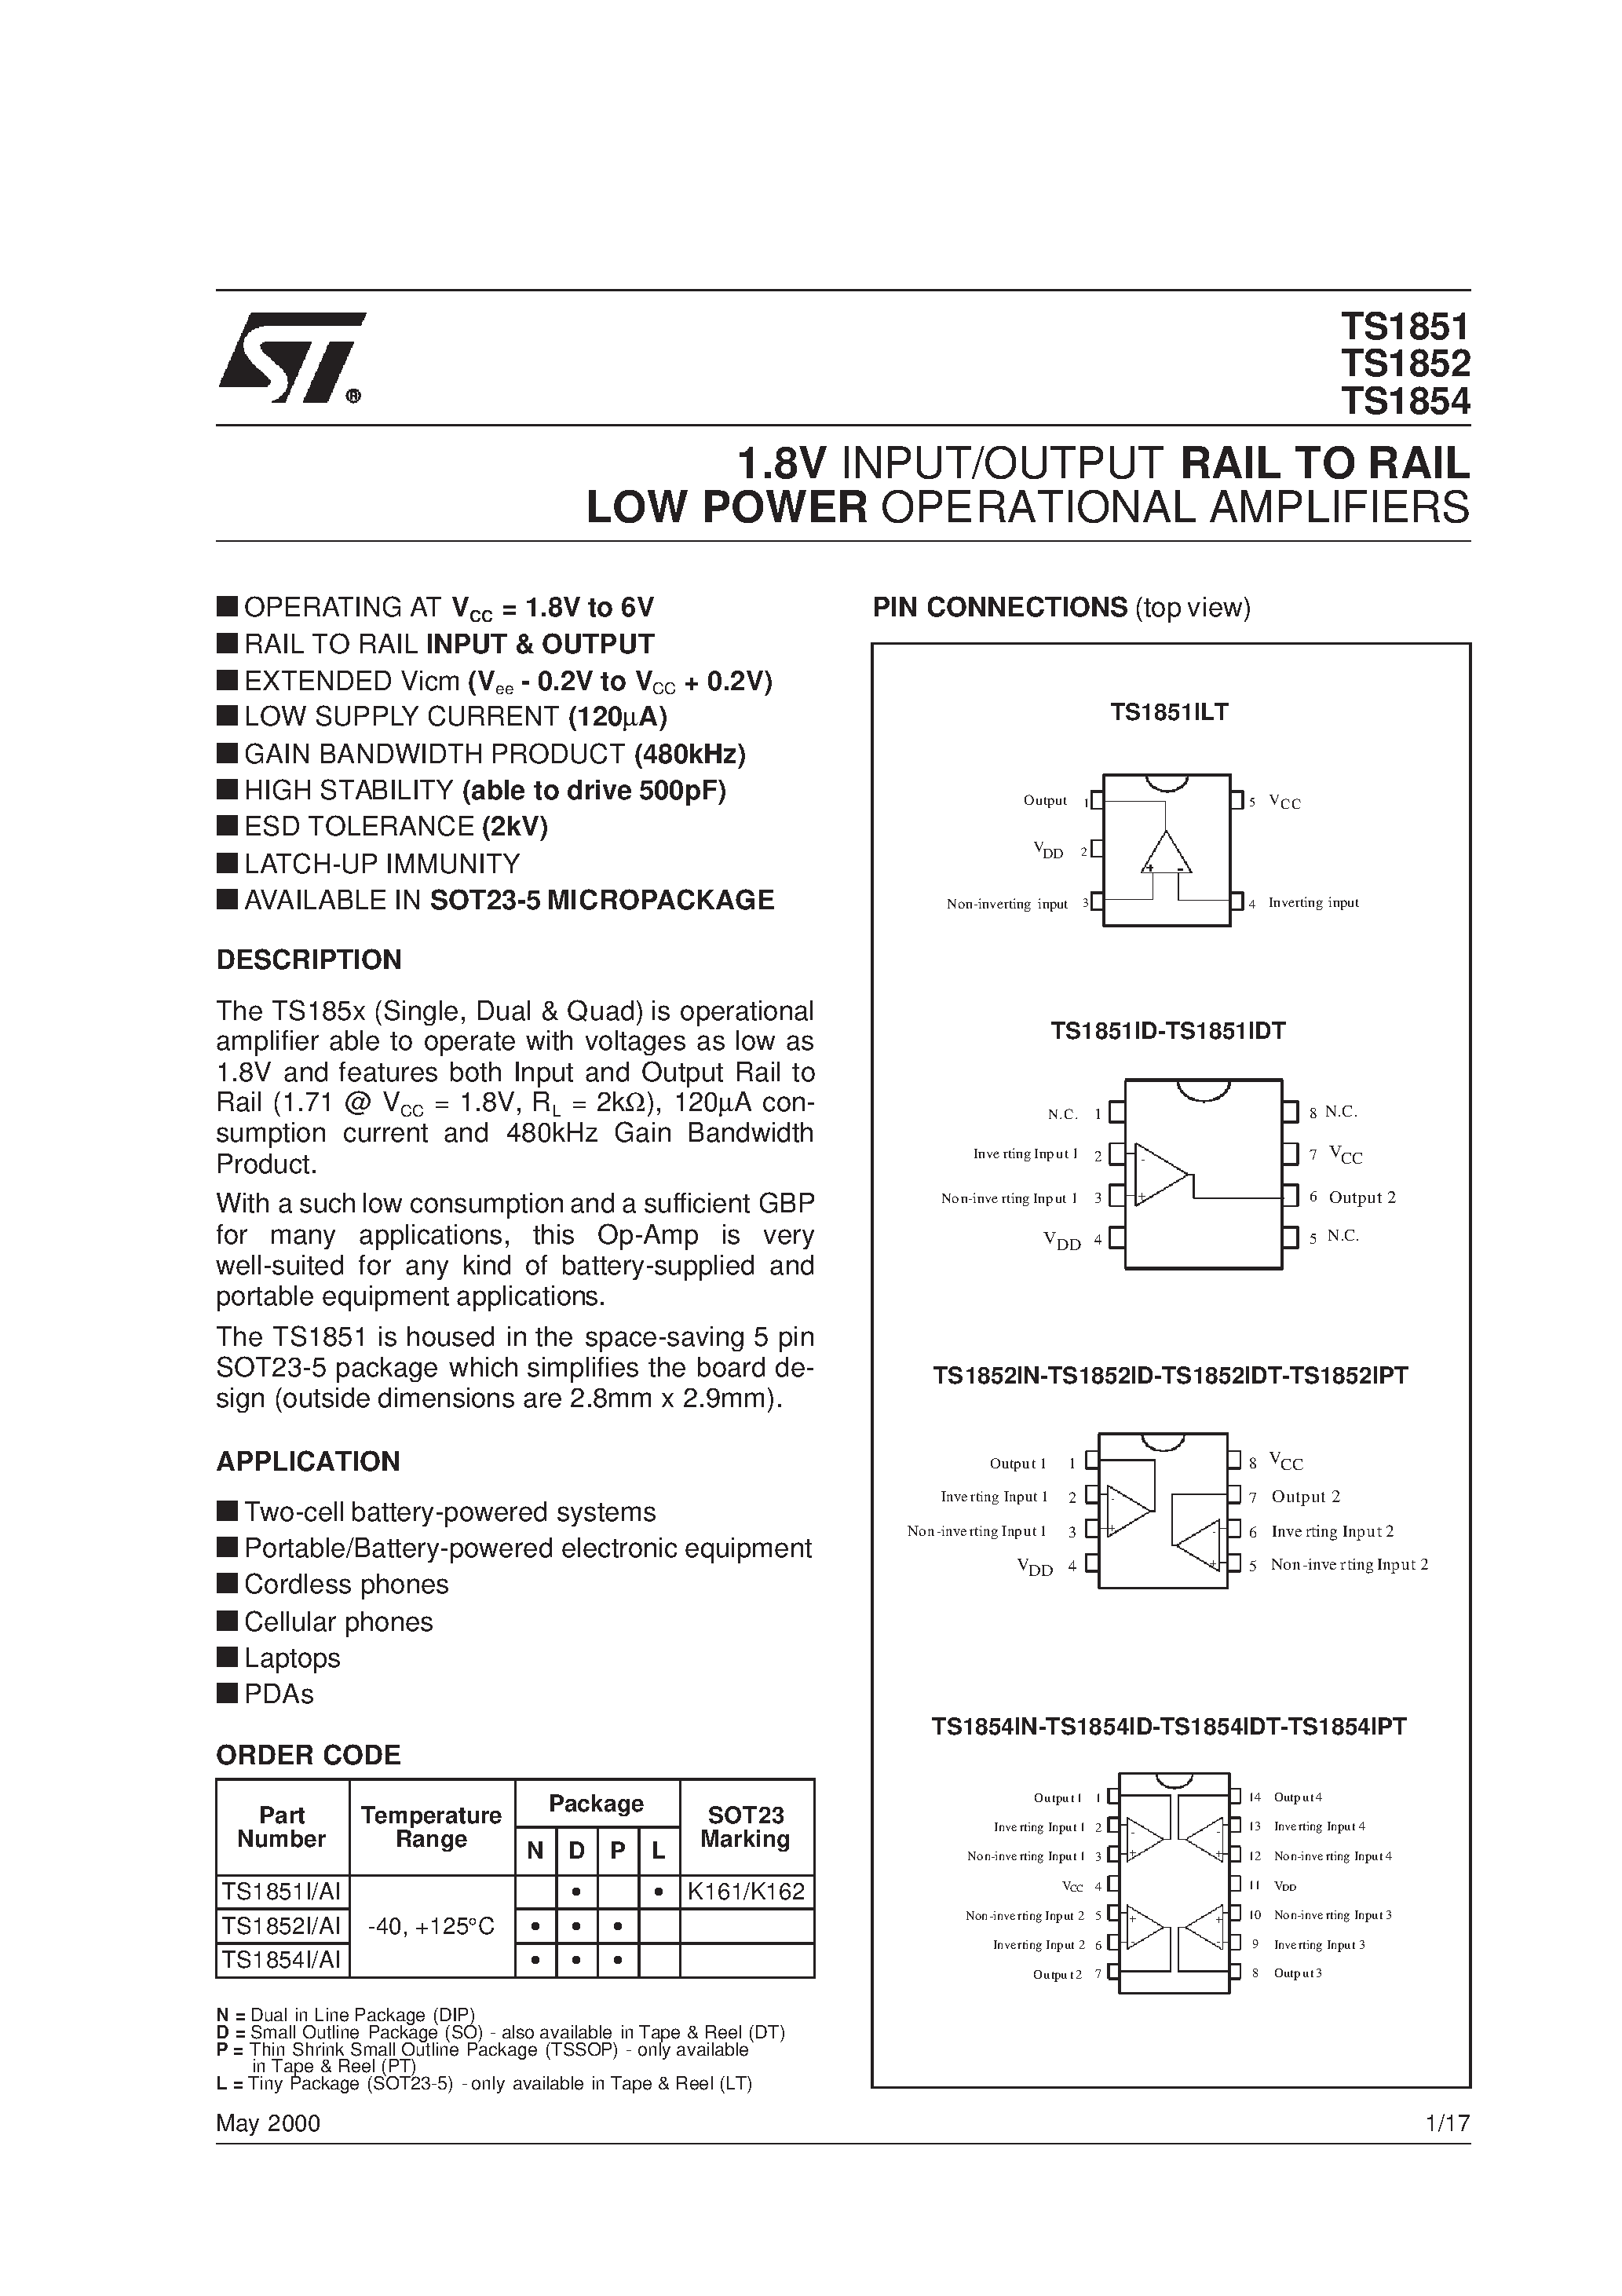 Datasheet TS1854 - 1.8V INPUT/OUTPUT RAIL TO RAIL LOW POWER OPERATIONAL AMPLIFIERS page 1